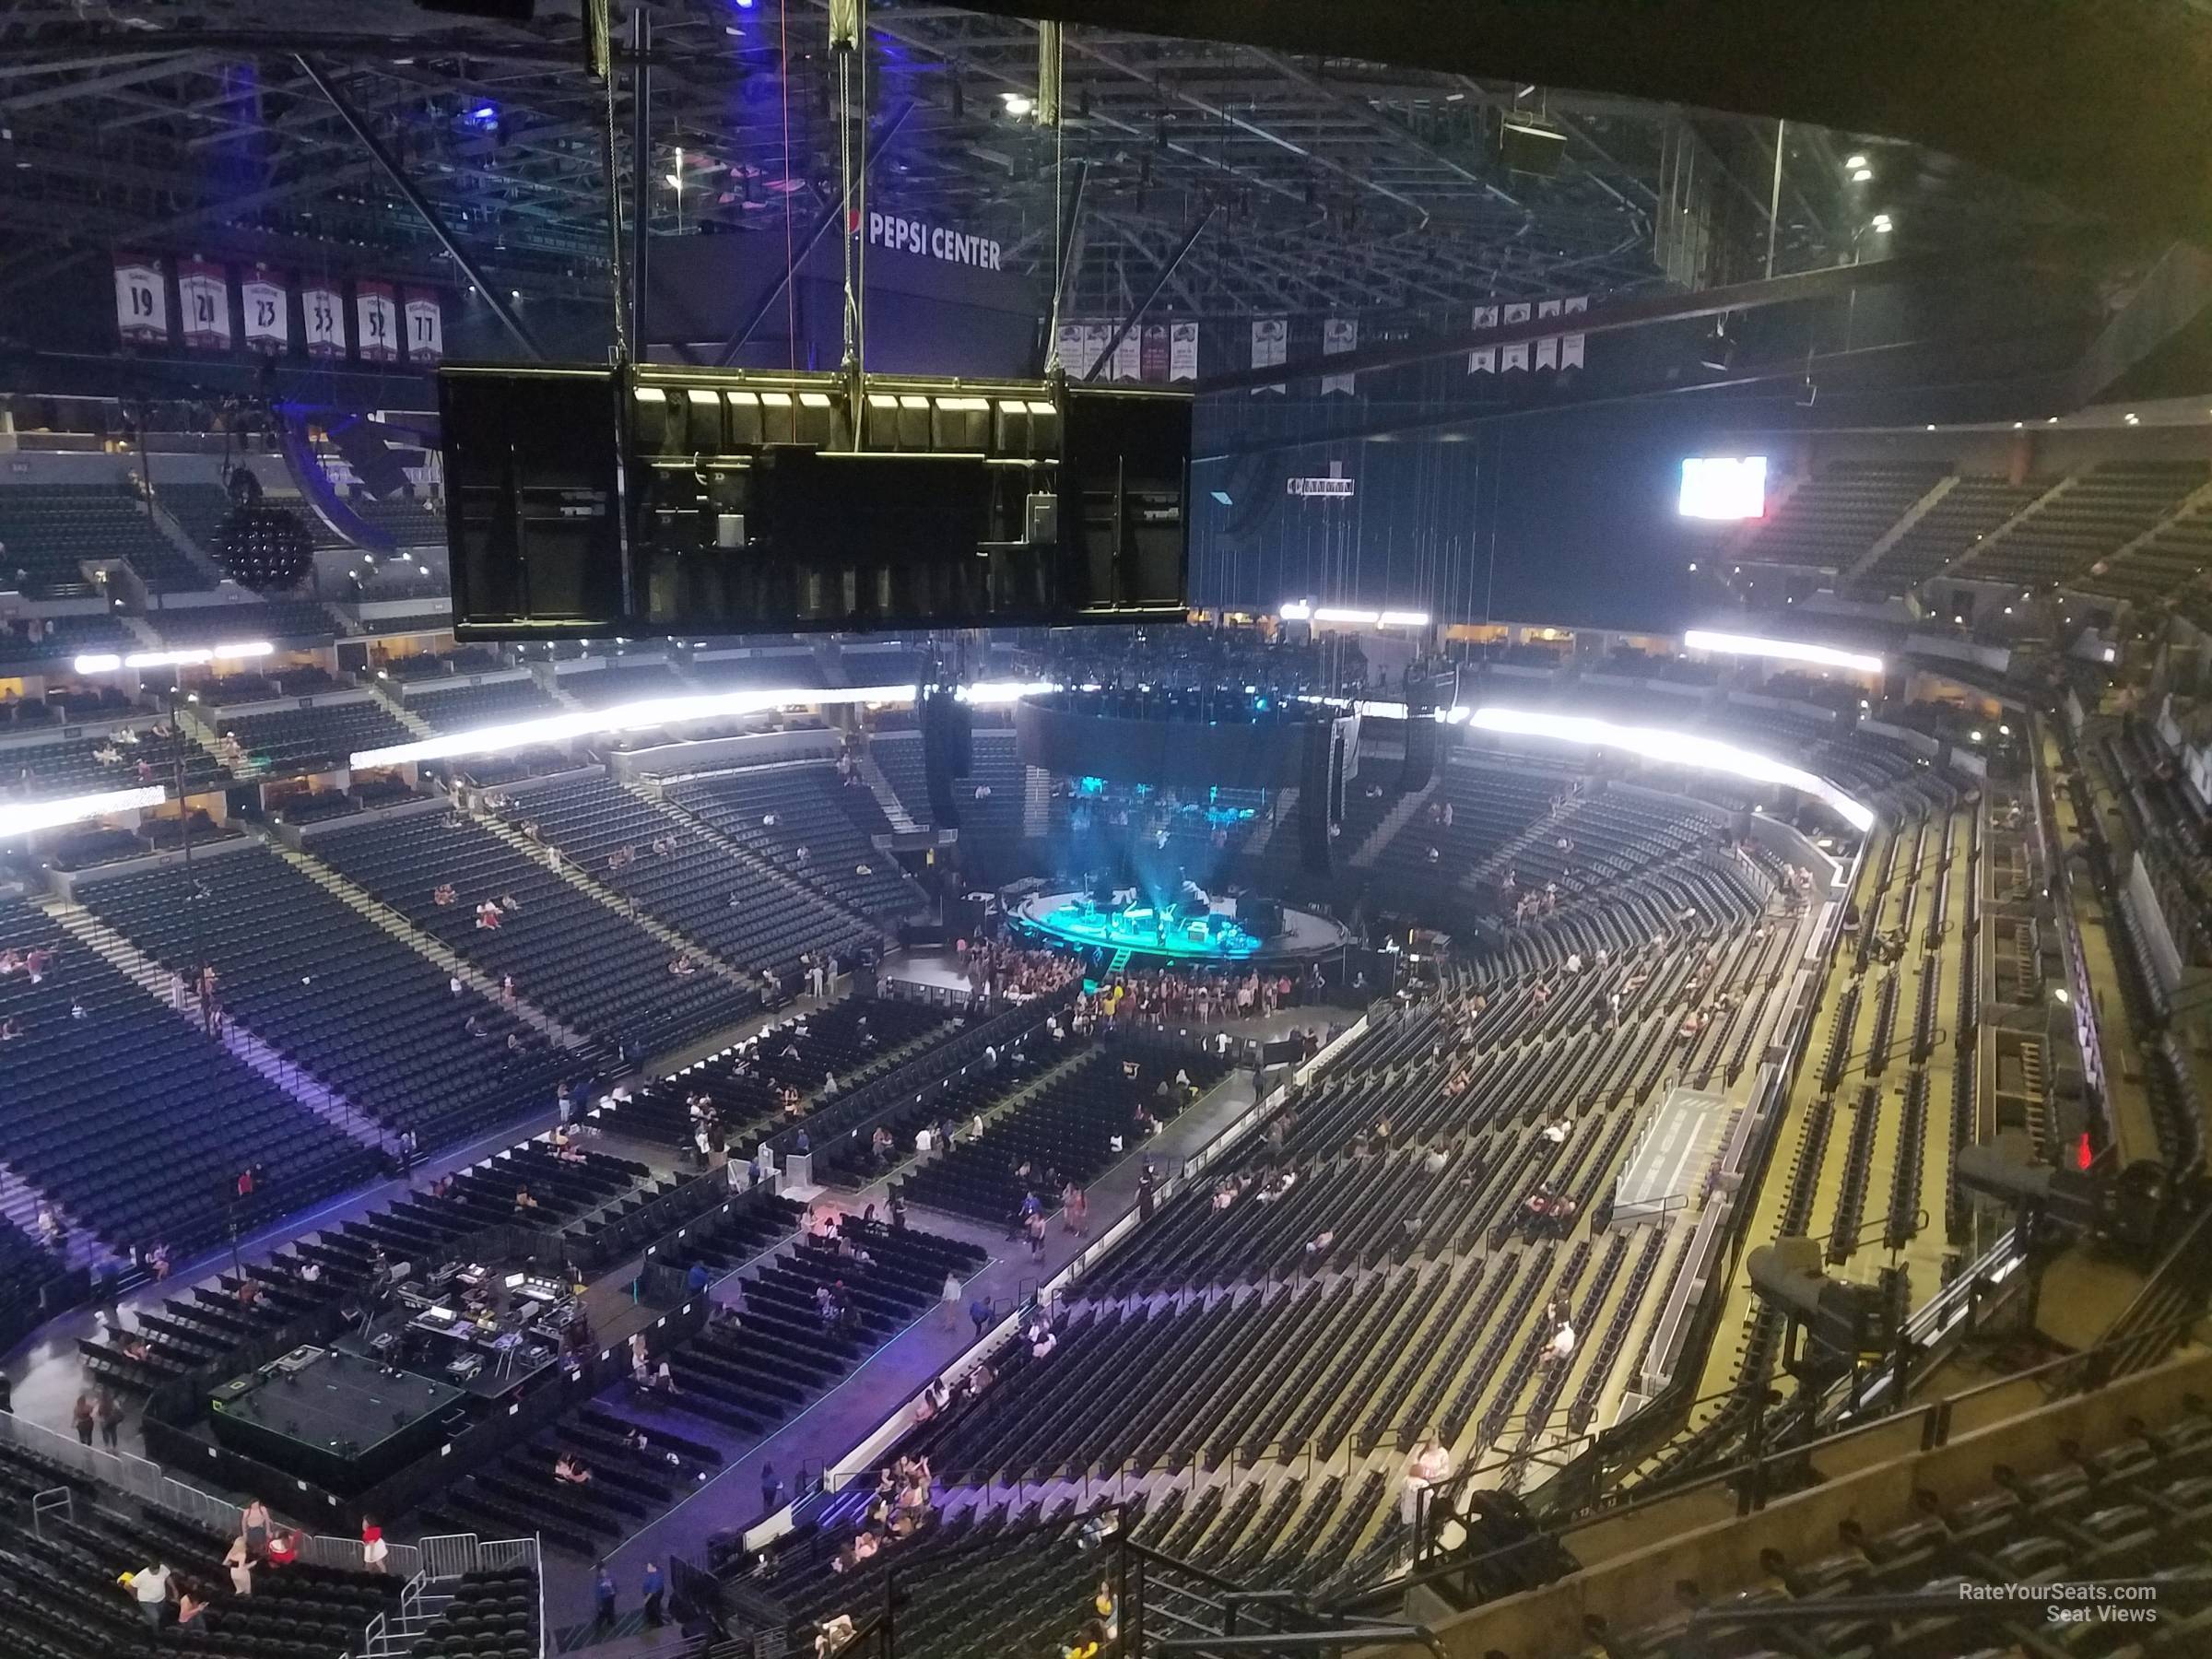 section 314, row 13 seat view  for concert - ball arena